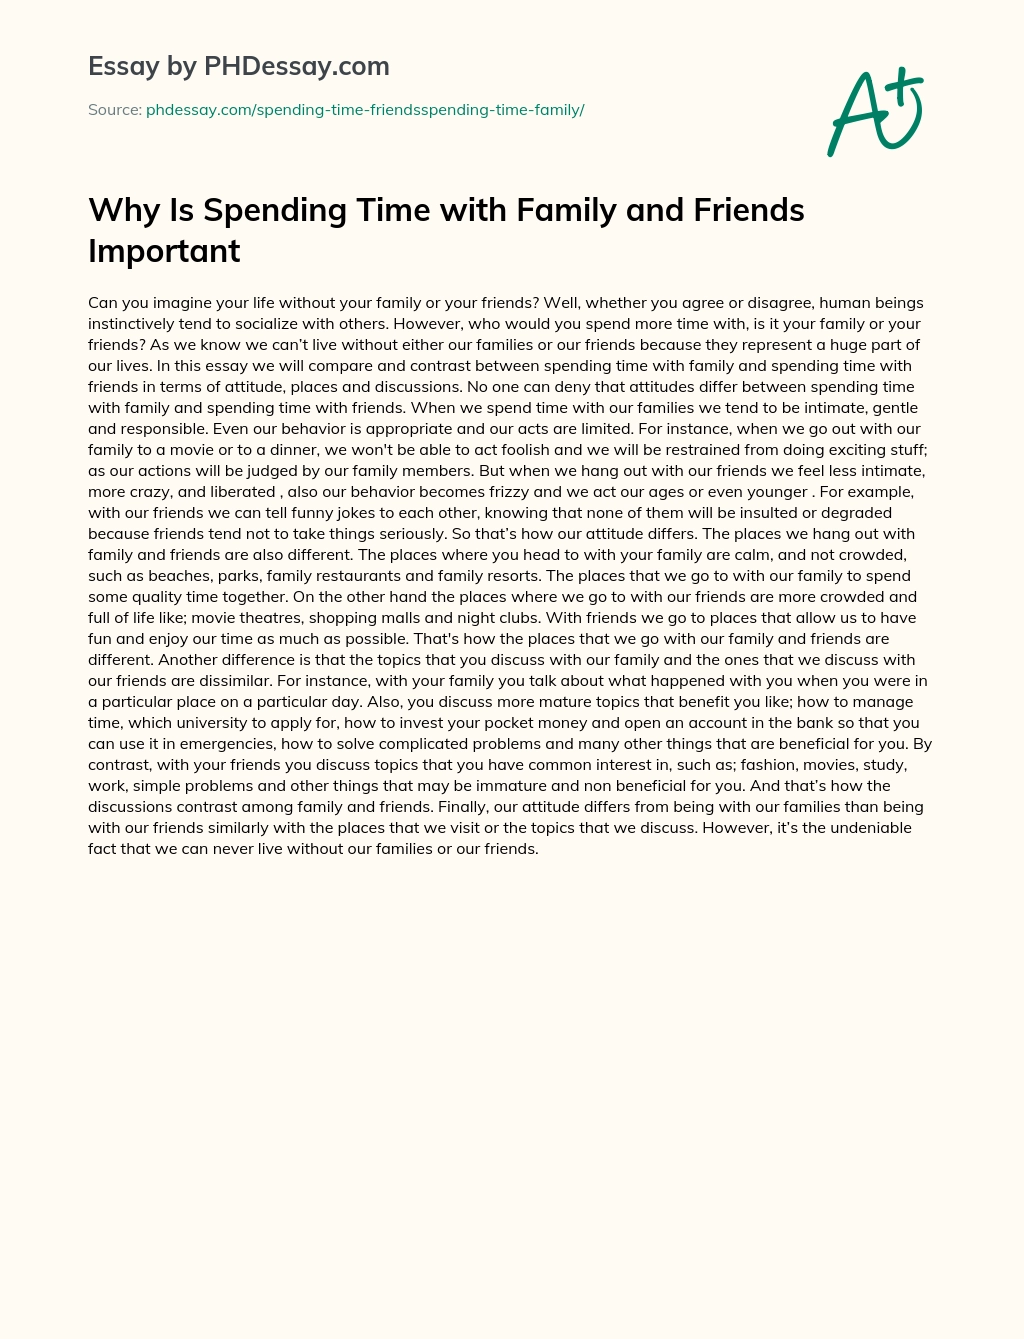 Why Is Spending Time with Family and Friends Important essay